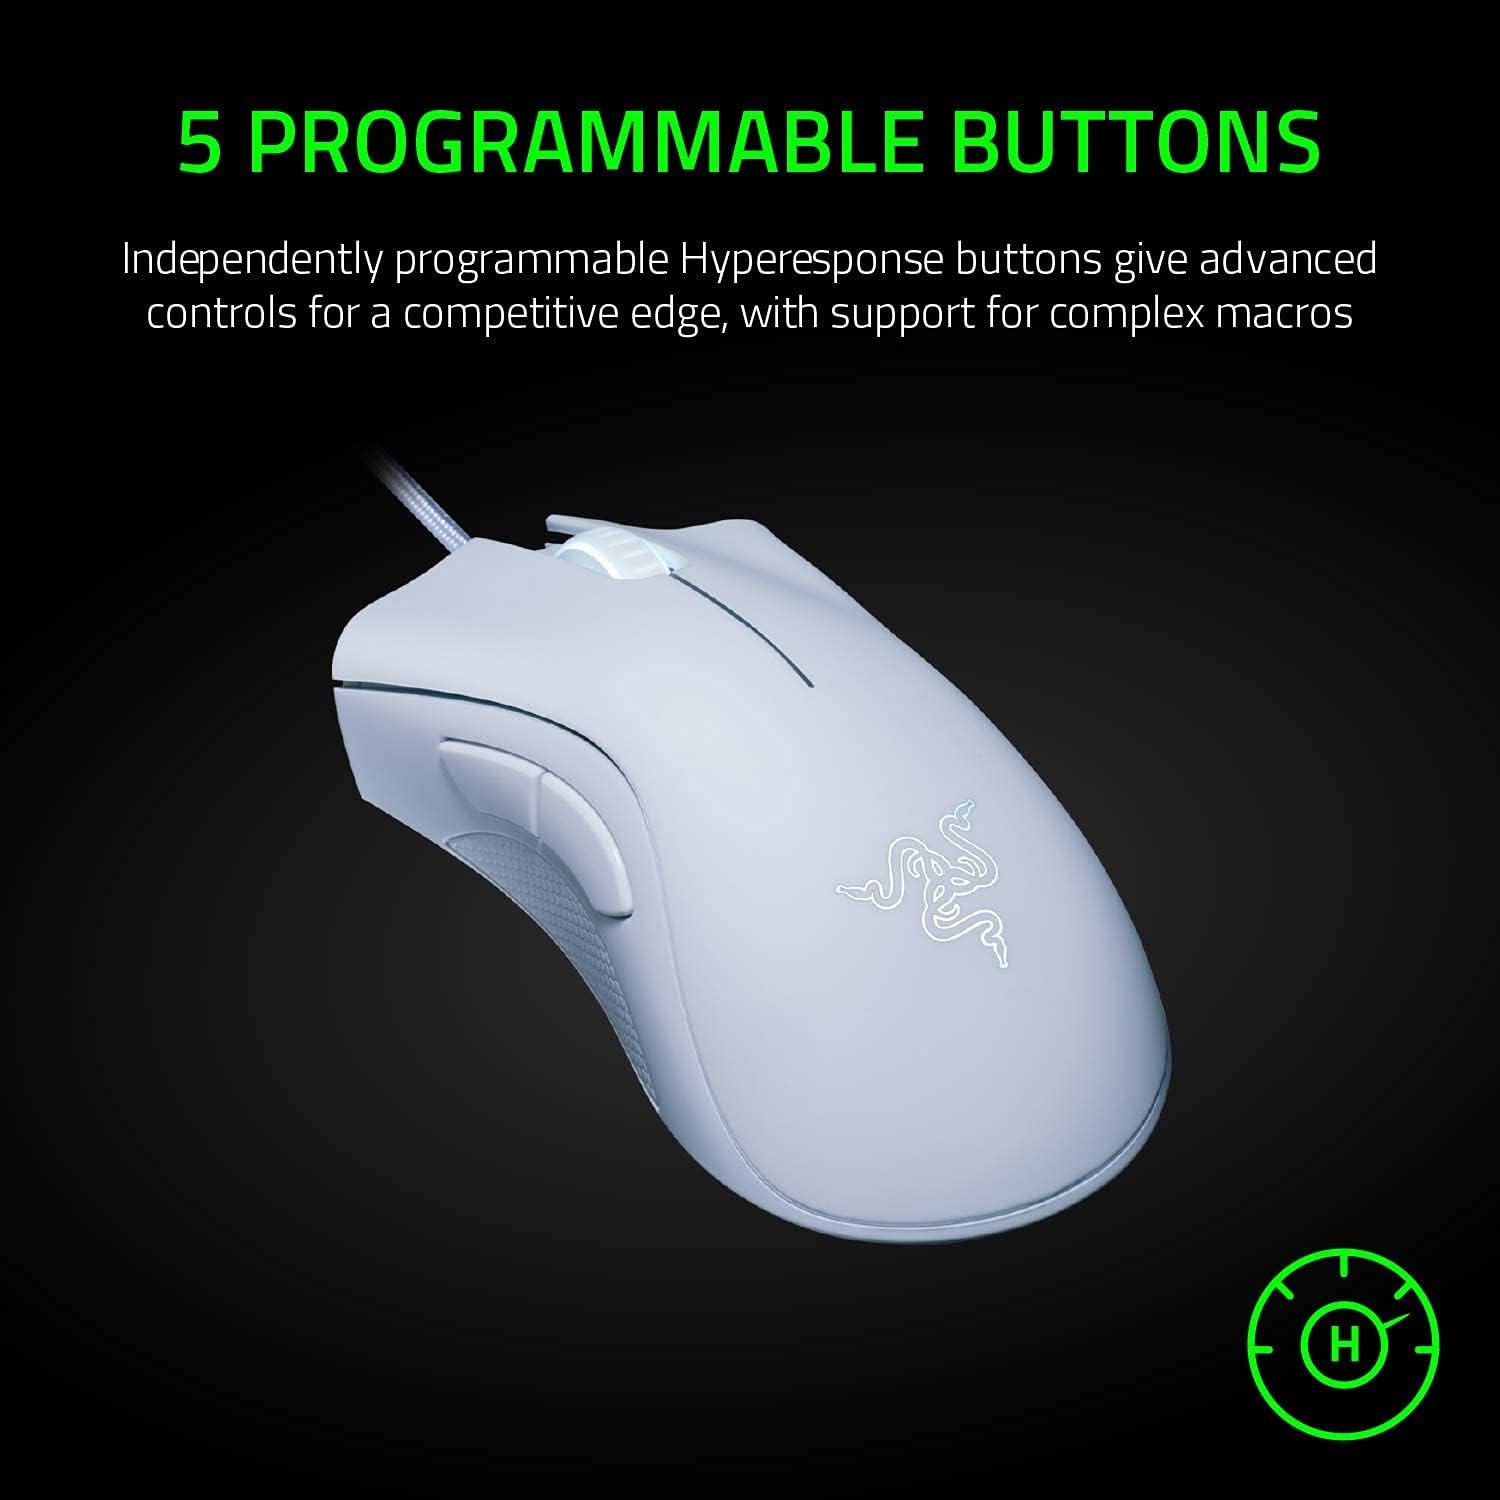 Razer DeathAdder Essential Gaming Mouse: 6400 DPI Optical Sensor - 5 Programmable Buttons - Mechanical Switches - Rubber Side Grips - Mercury White - Geek Tech